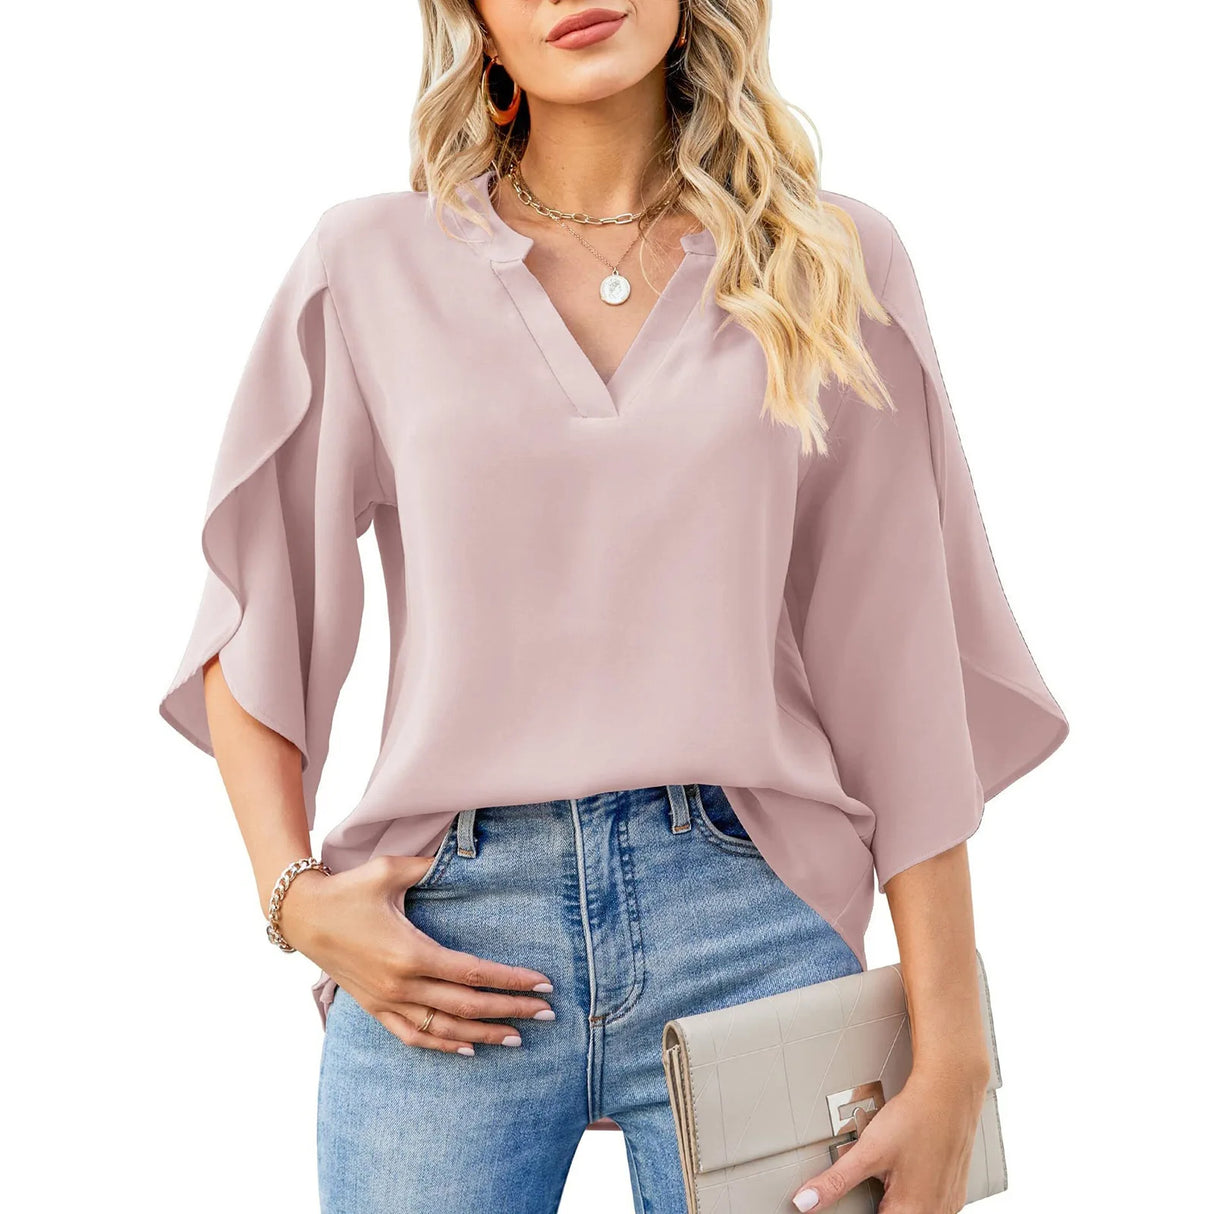 Women's plain blouse with short open sleeves and V neck